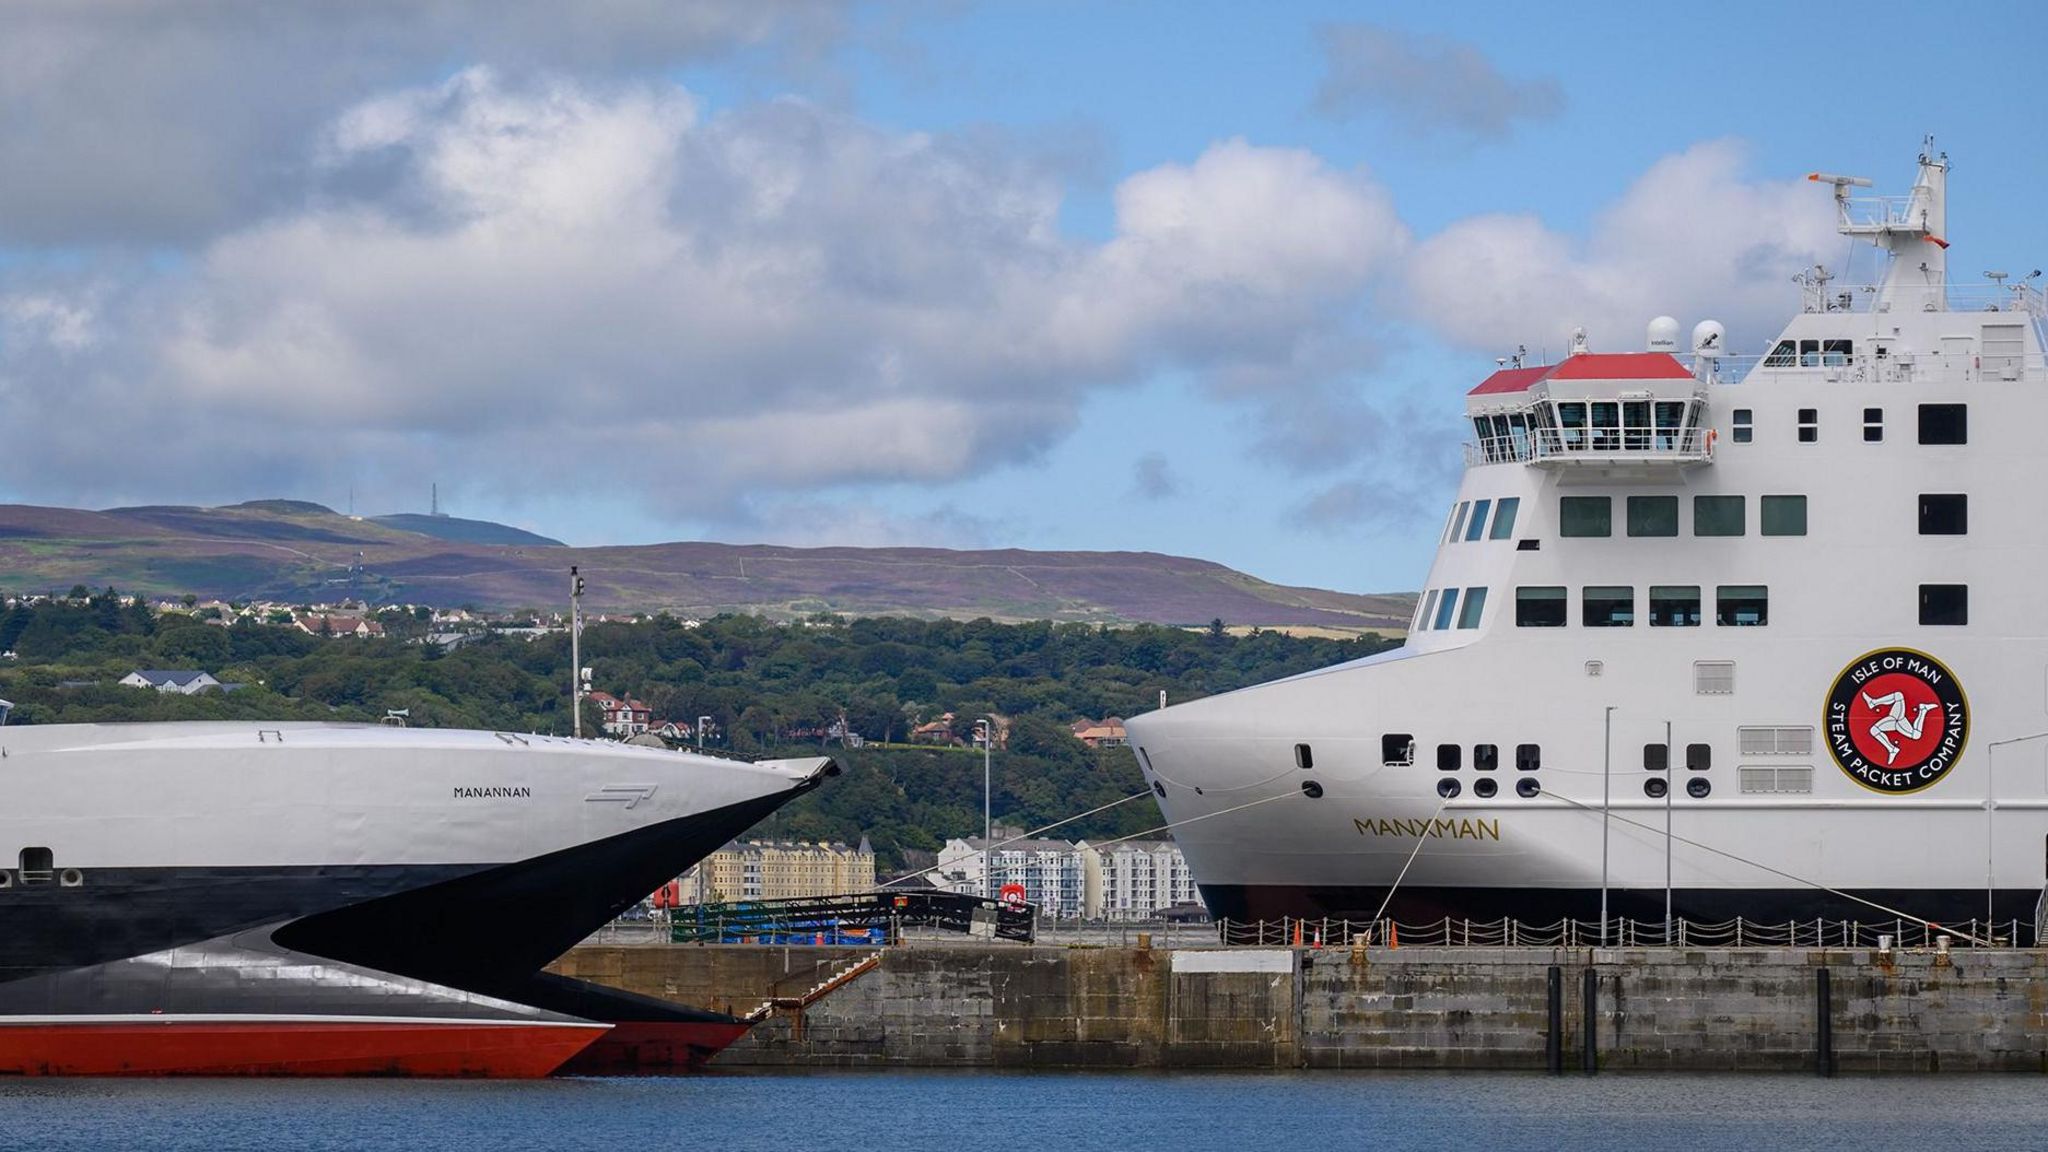 Isle of Man Steam Packet vessels Manannan and Manxman at Victoria Pier